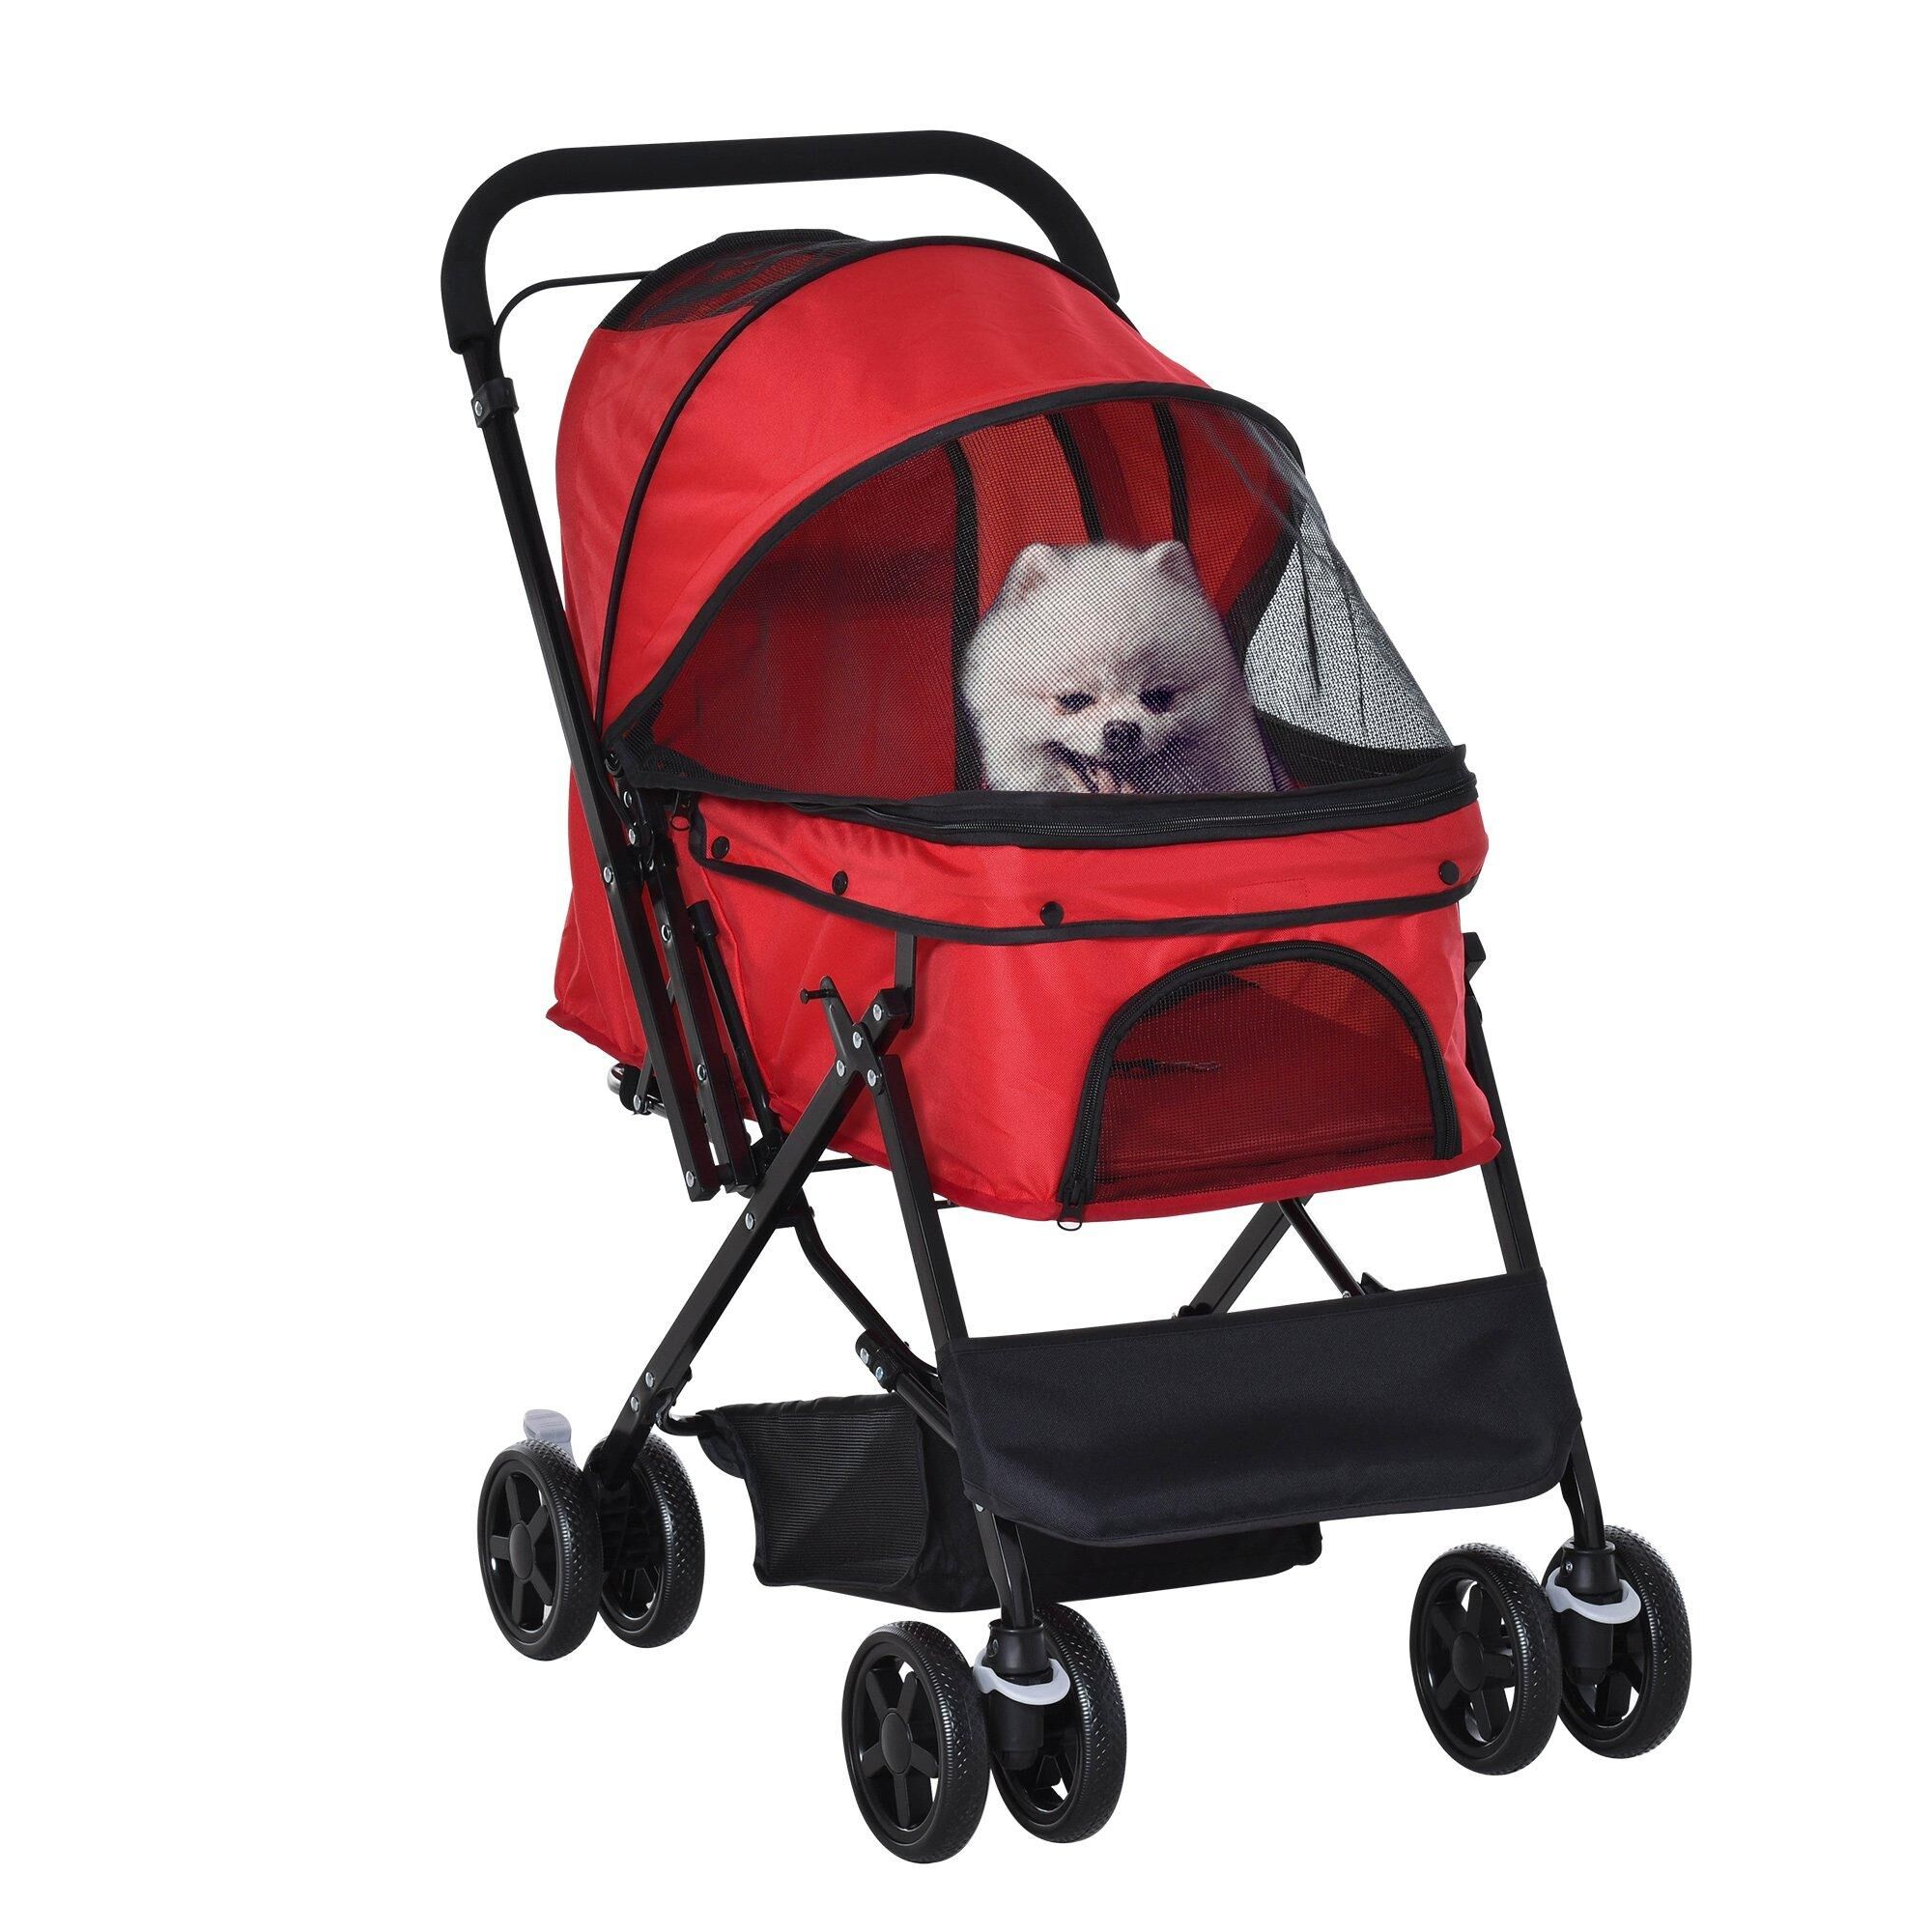 PawHut Pet Stroller Dog Cat Travel Pushchair Foldable Jogger with Reversible Handle EVA Wheel Brake Basket Adjustable Canopy Safety Leash for Small Dogs